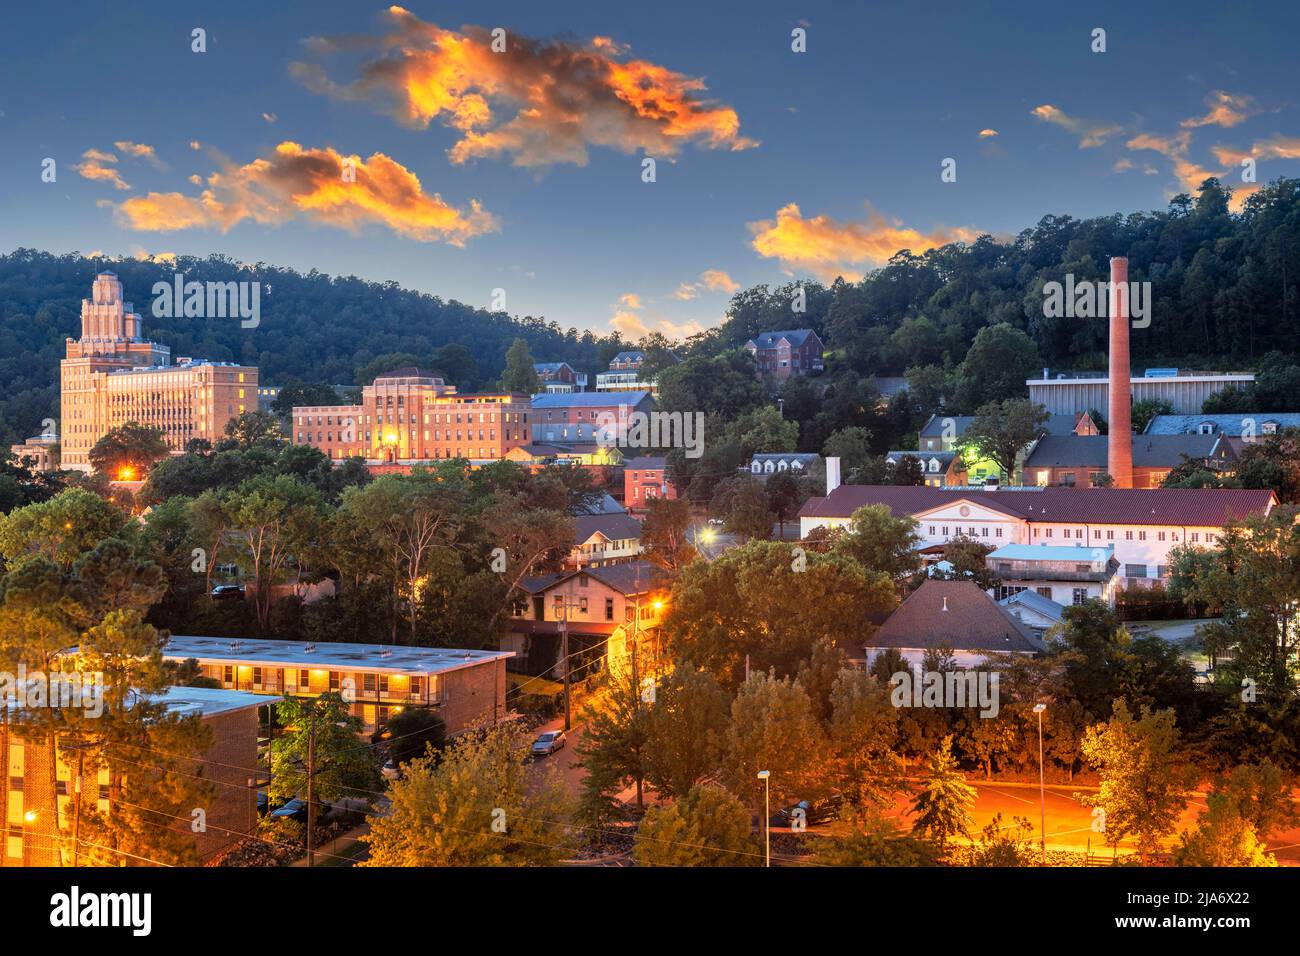 Hot Springs, Arkansas, USA townscape at dusk in the mountains. Stock Photo